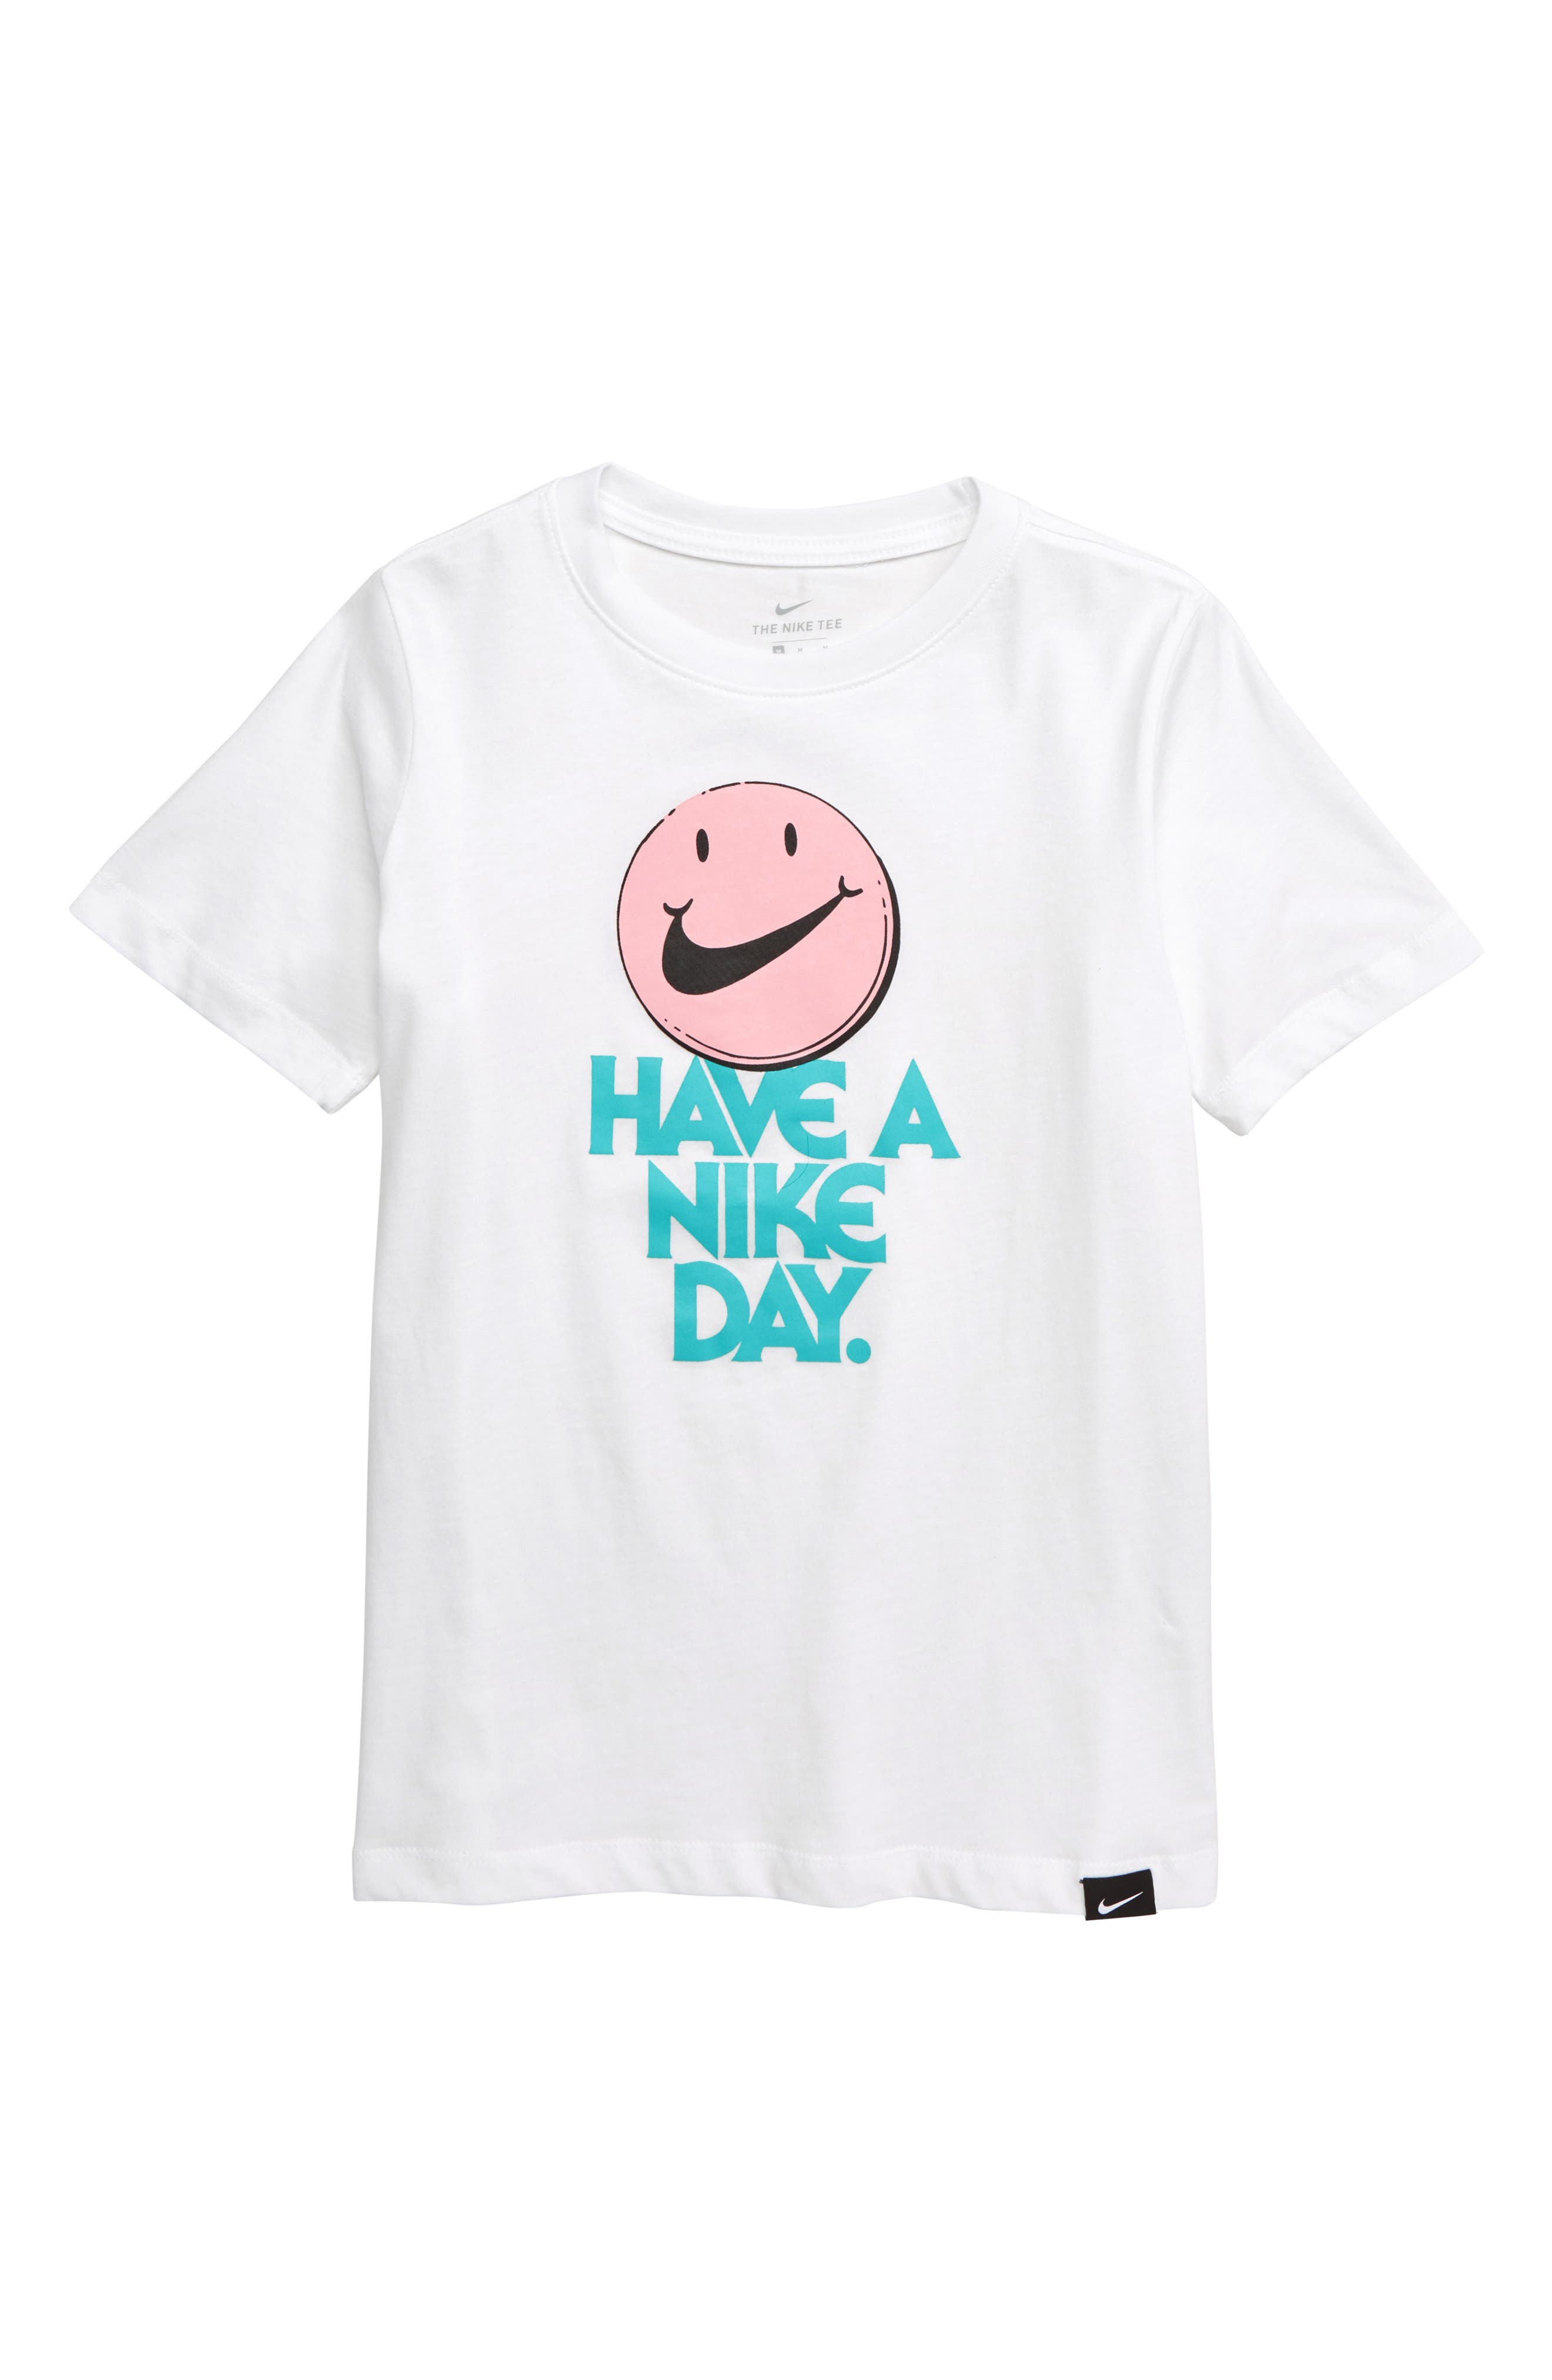 have a nike day shirt white